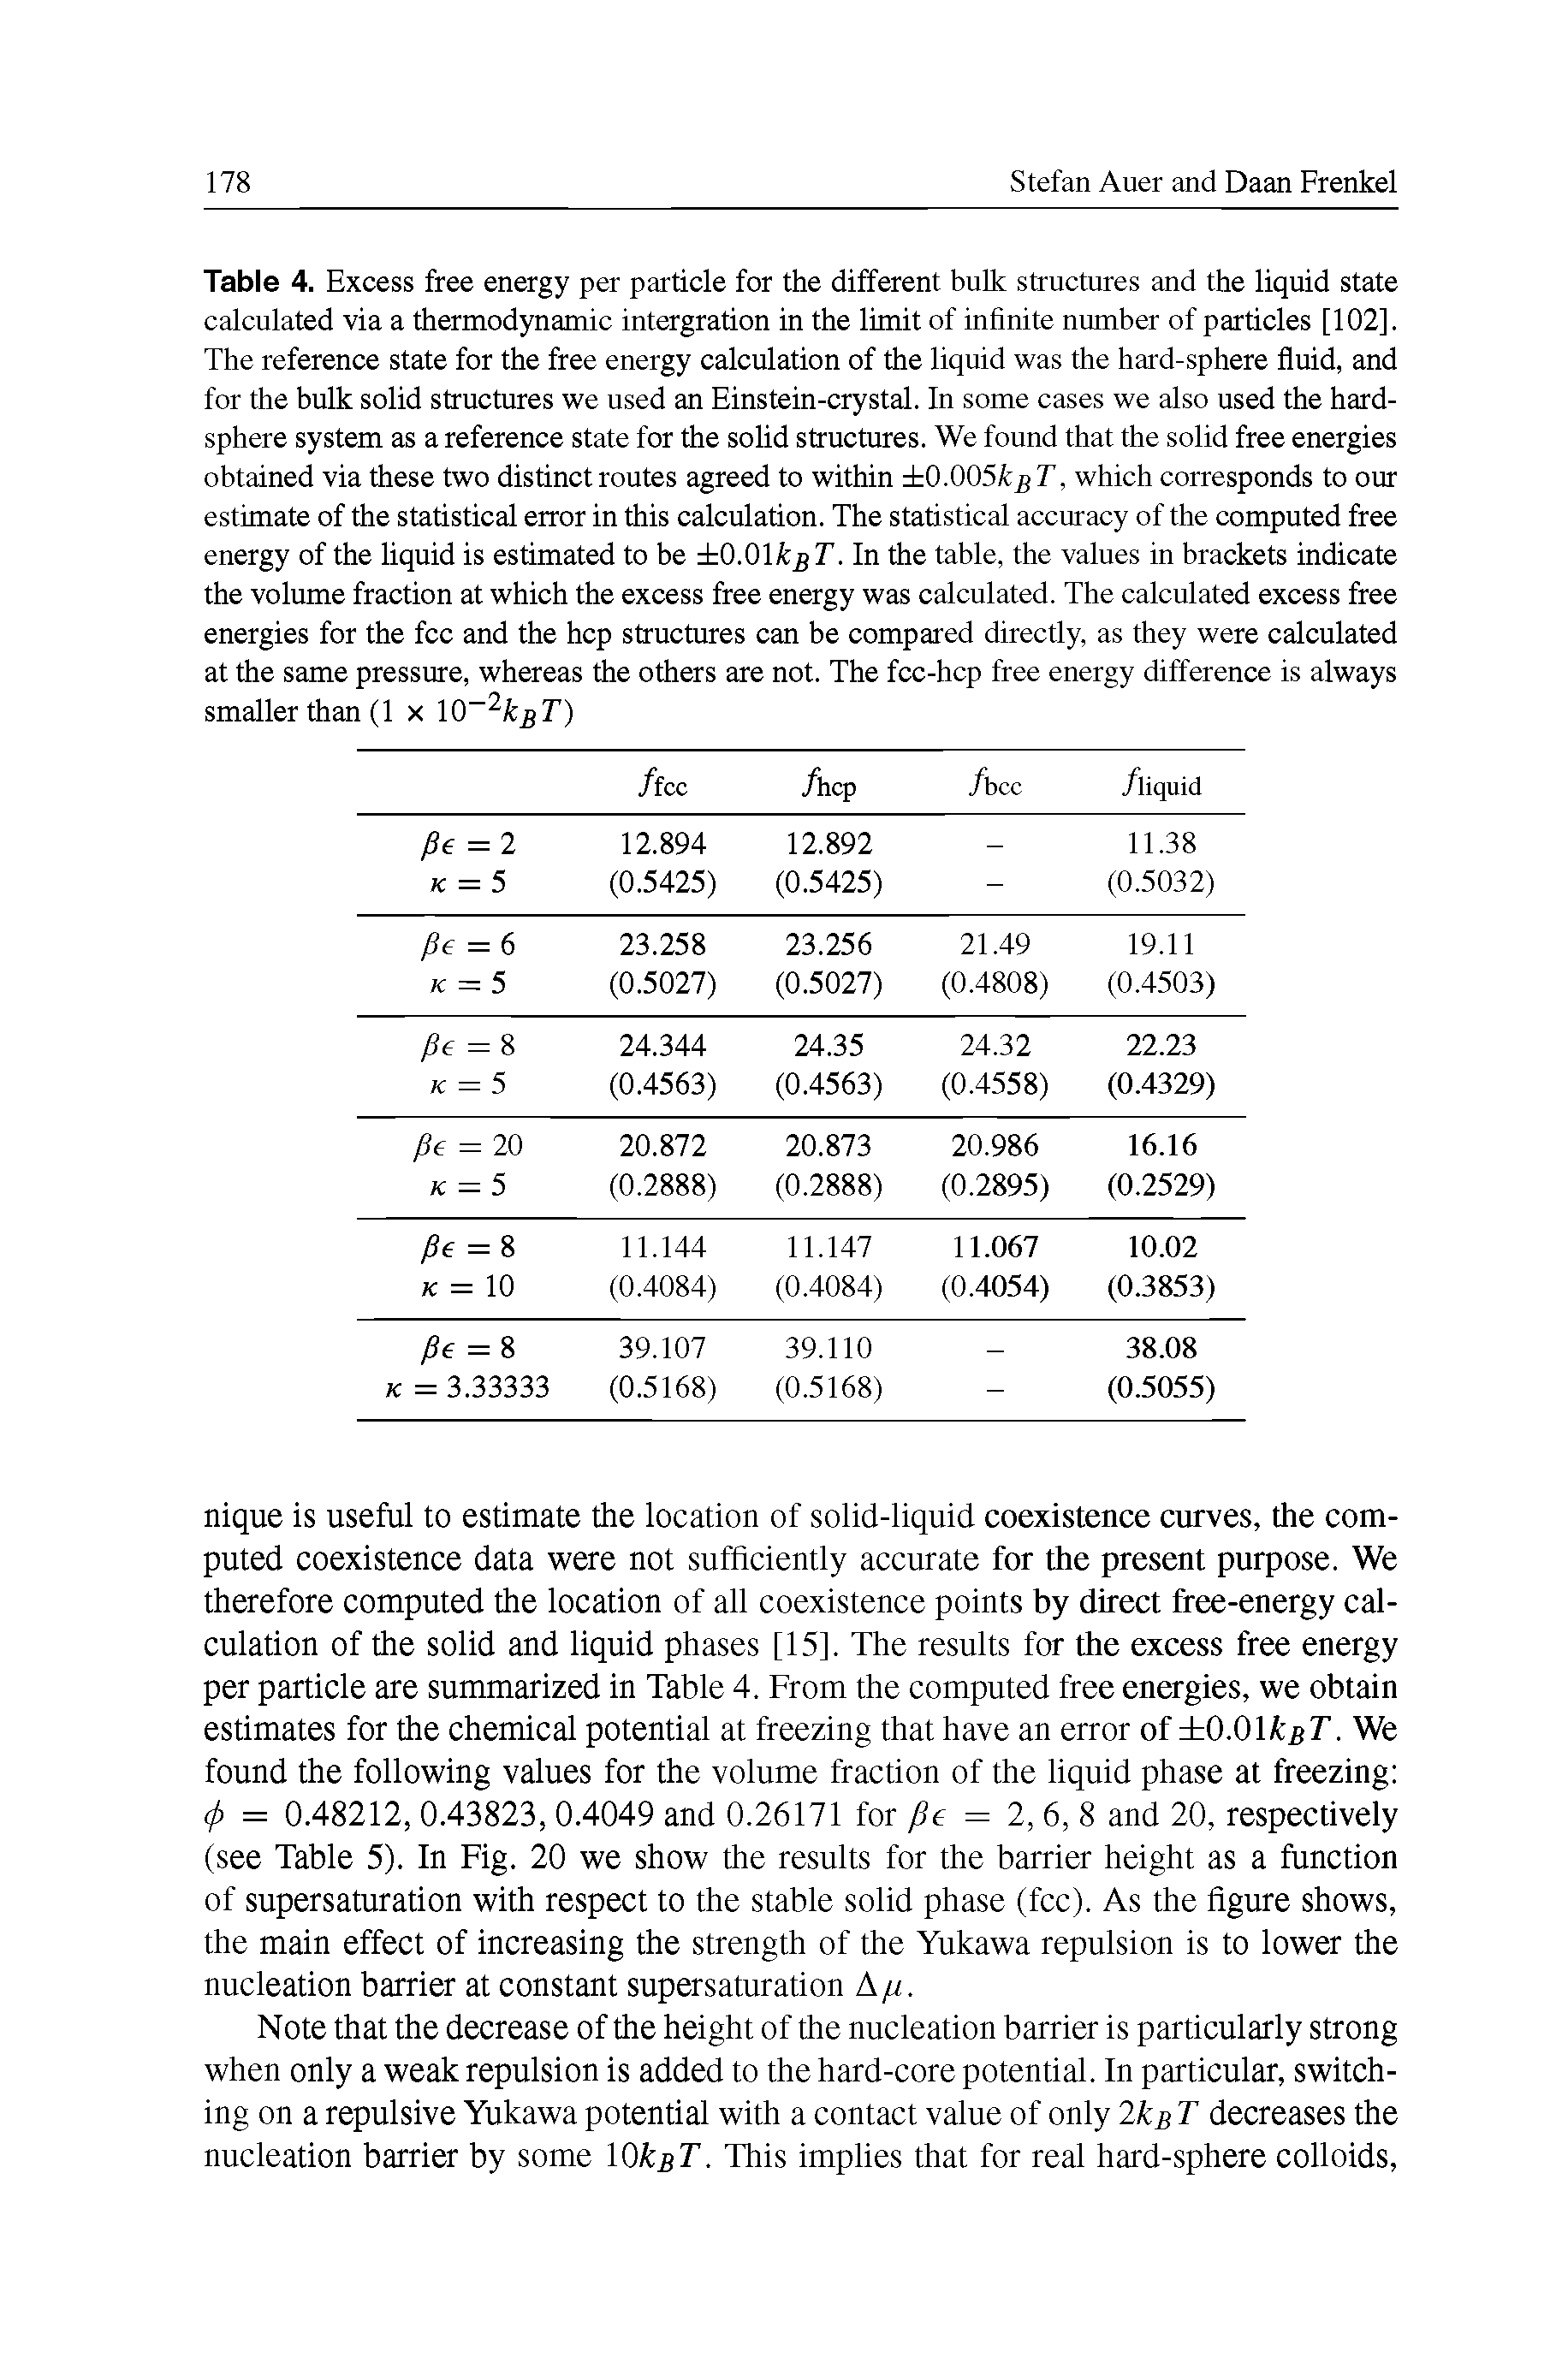 Table 4. Excess free energy per particle for the different bulk structures and the liquid state calculated via a thermodynamic intergration in the limit of infinite number of particles [102]. The reference state for the free energy calculation of the liquid was the hard-sphere fluid, and for the bulk solid structures we used an Einstein-crystal. In some cases we also used the hard-sphere system as a reference state for the sohd structures. We found that the solid free energies obtained via these two distinct routes agreed to within 0.005kgT, which corresponds to our estimate of the statistical error in this calculation. The statistical accuracy of the computed free energy of the liquid is estimated to be iO.Olfc T. In the table, the values in brackets indicate the volume fraction at which the excess free energy was calculated. The calculated excess free energies for the fee and the hep structures can be compared directly, as they were calculated at the same pressure, whereas the others are not. The fcc-hcp free energy difference is always smaller than (1 x Q kgT)...